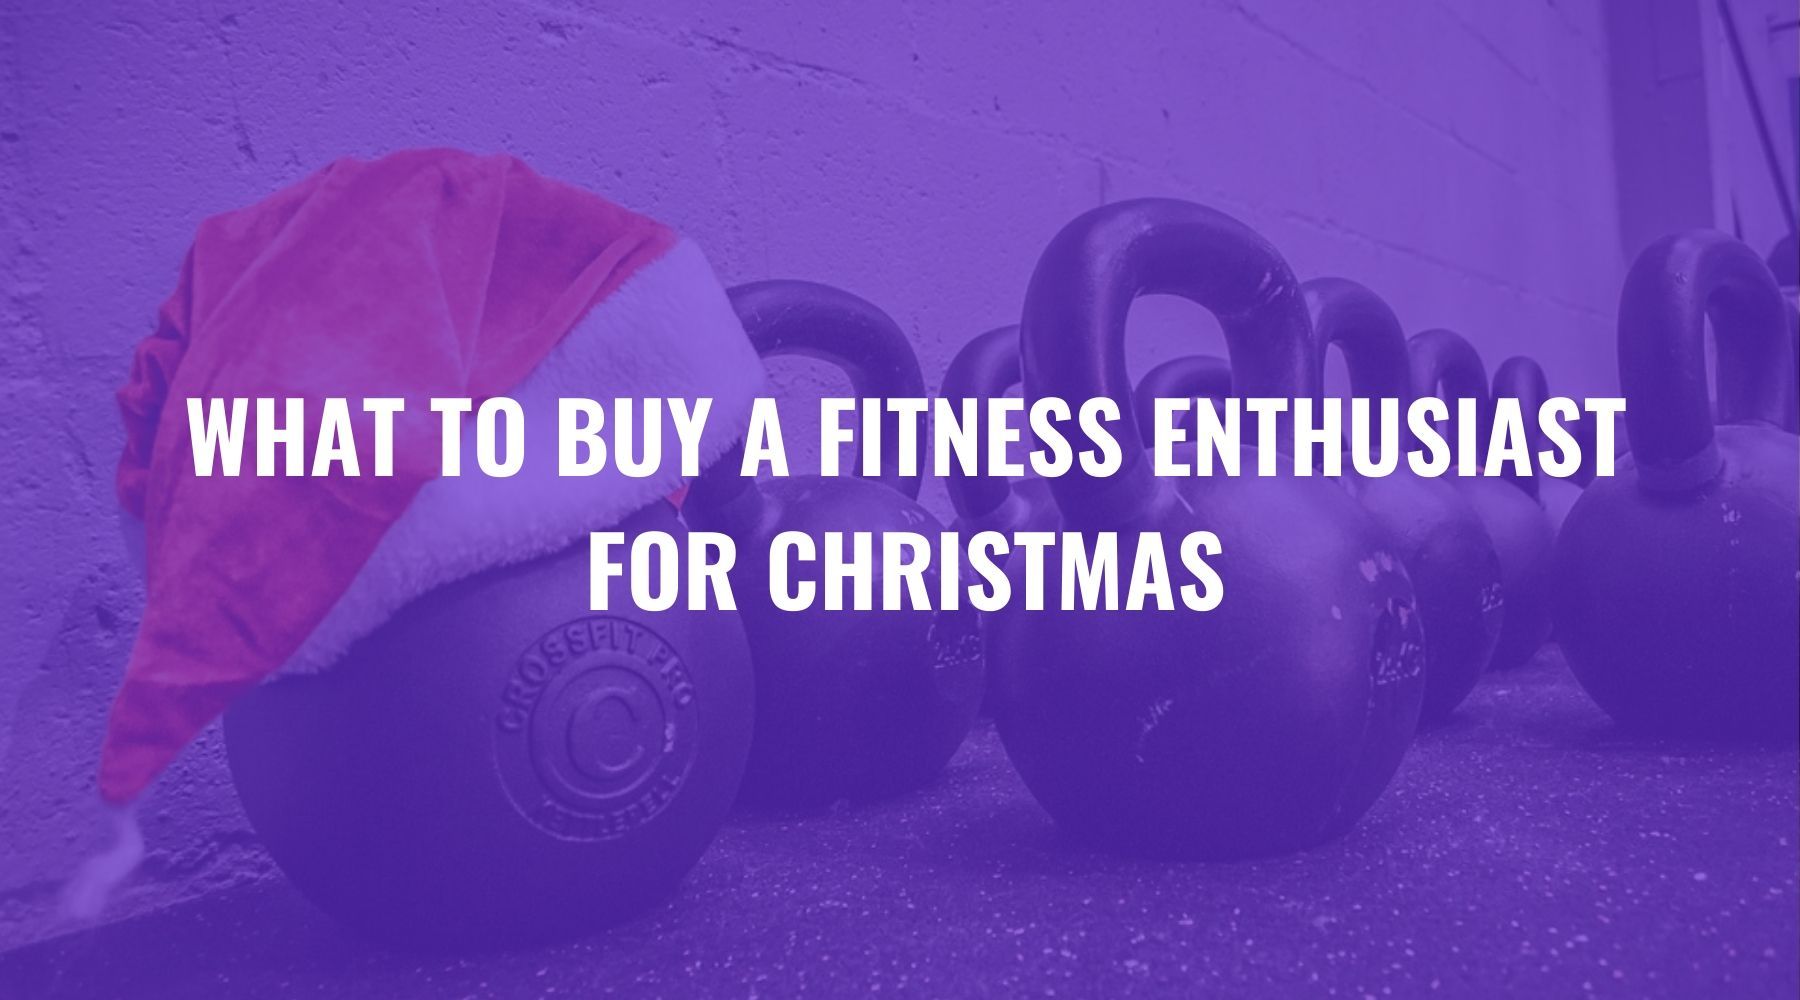 What to Buy a Fitness Enthusiast for Christmas